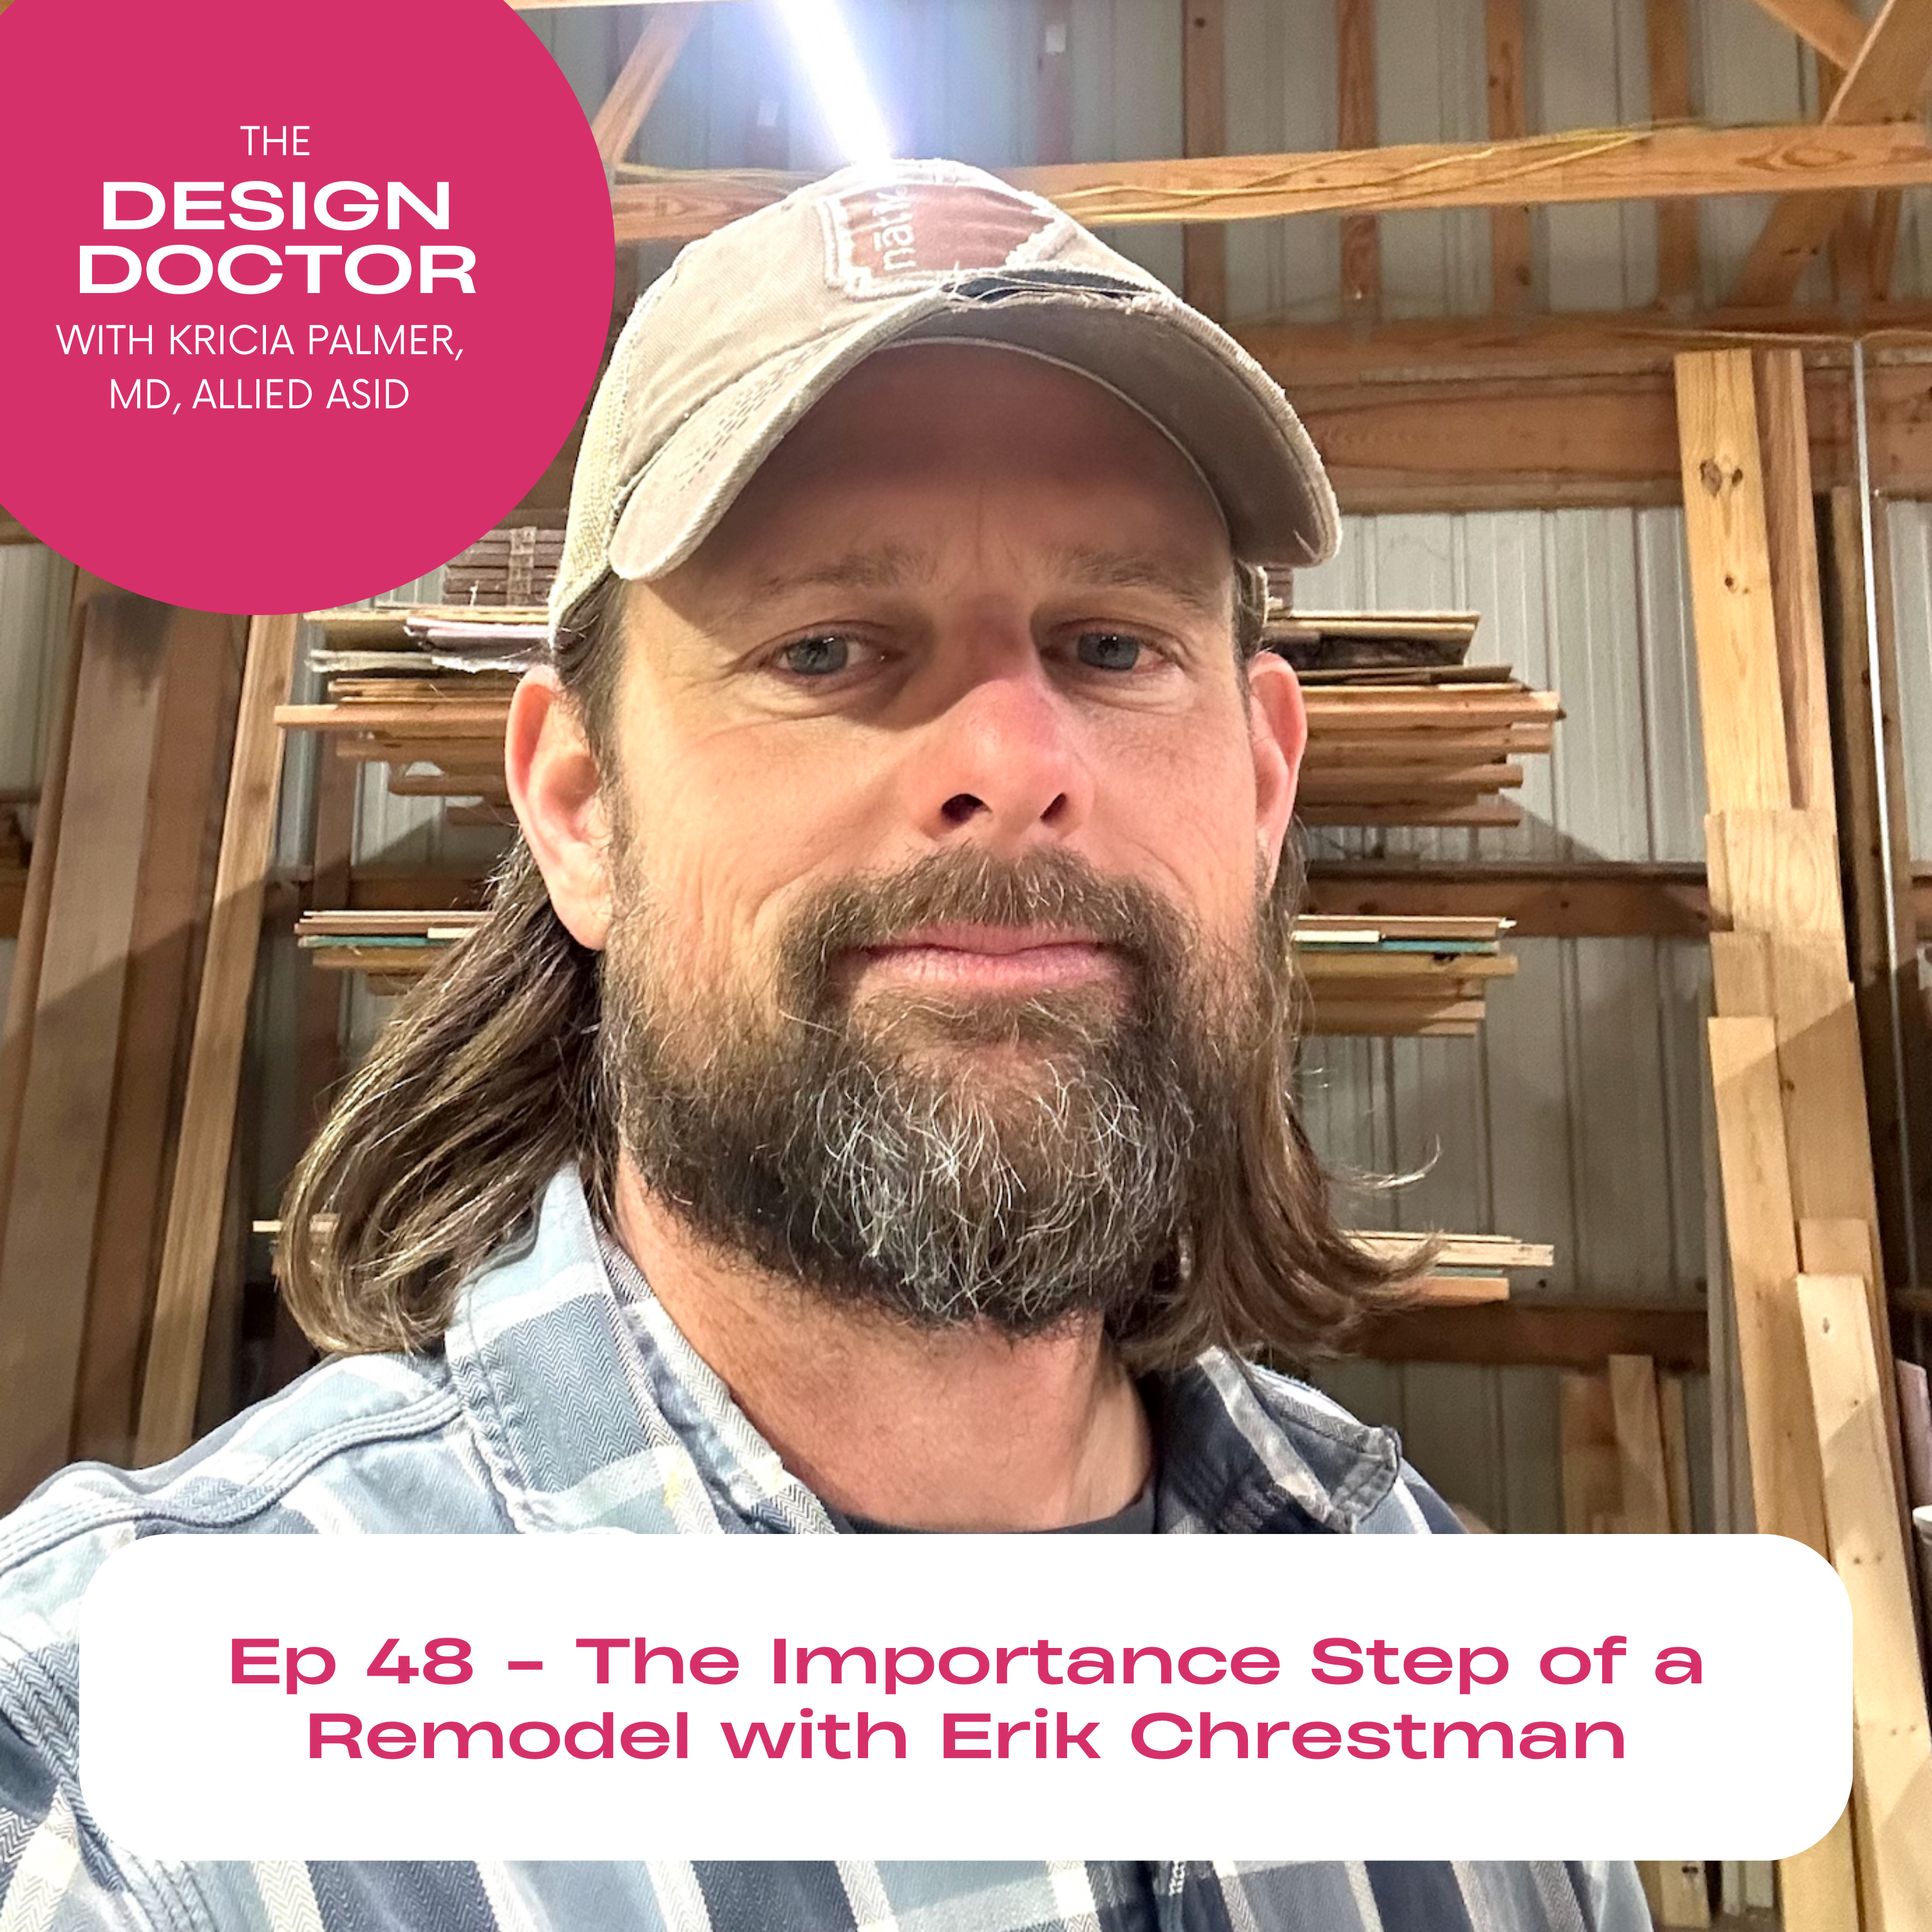 Episode 48 - The Importance Step of a Remodel with Erik Chrestman